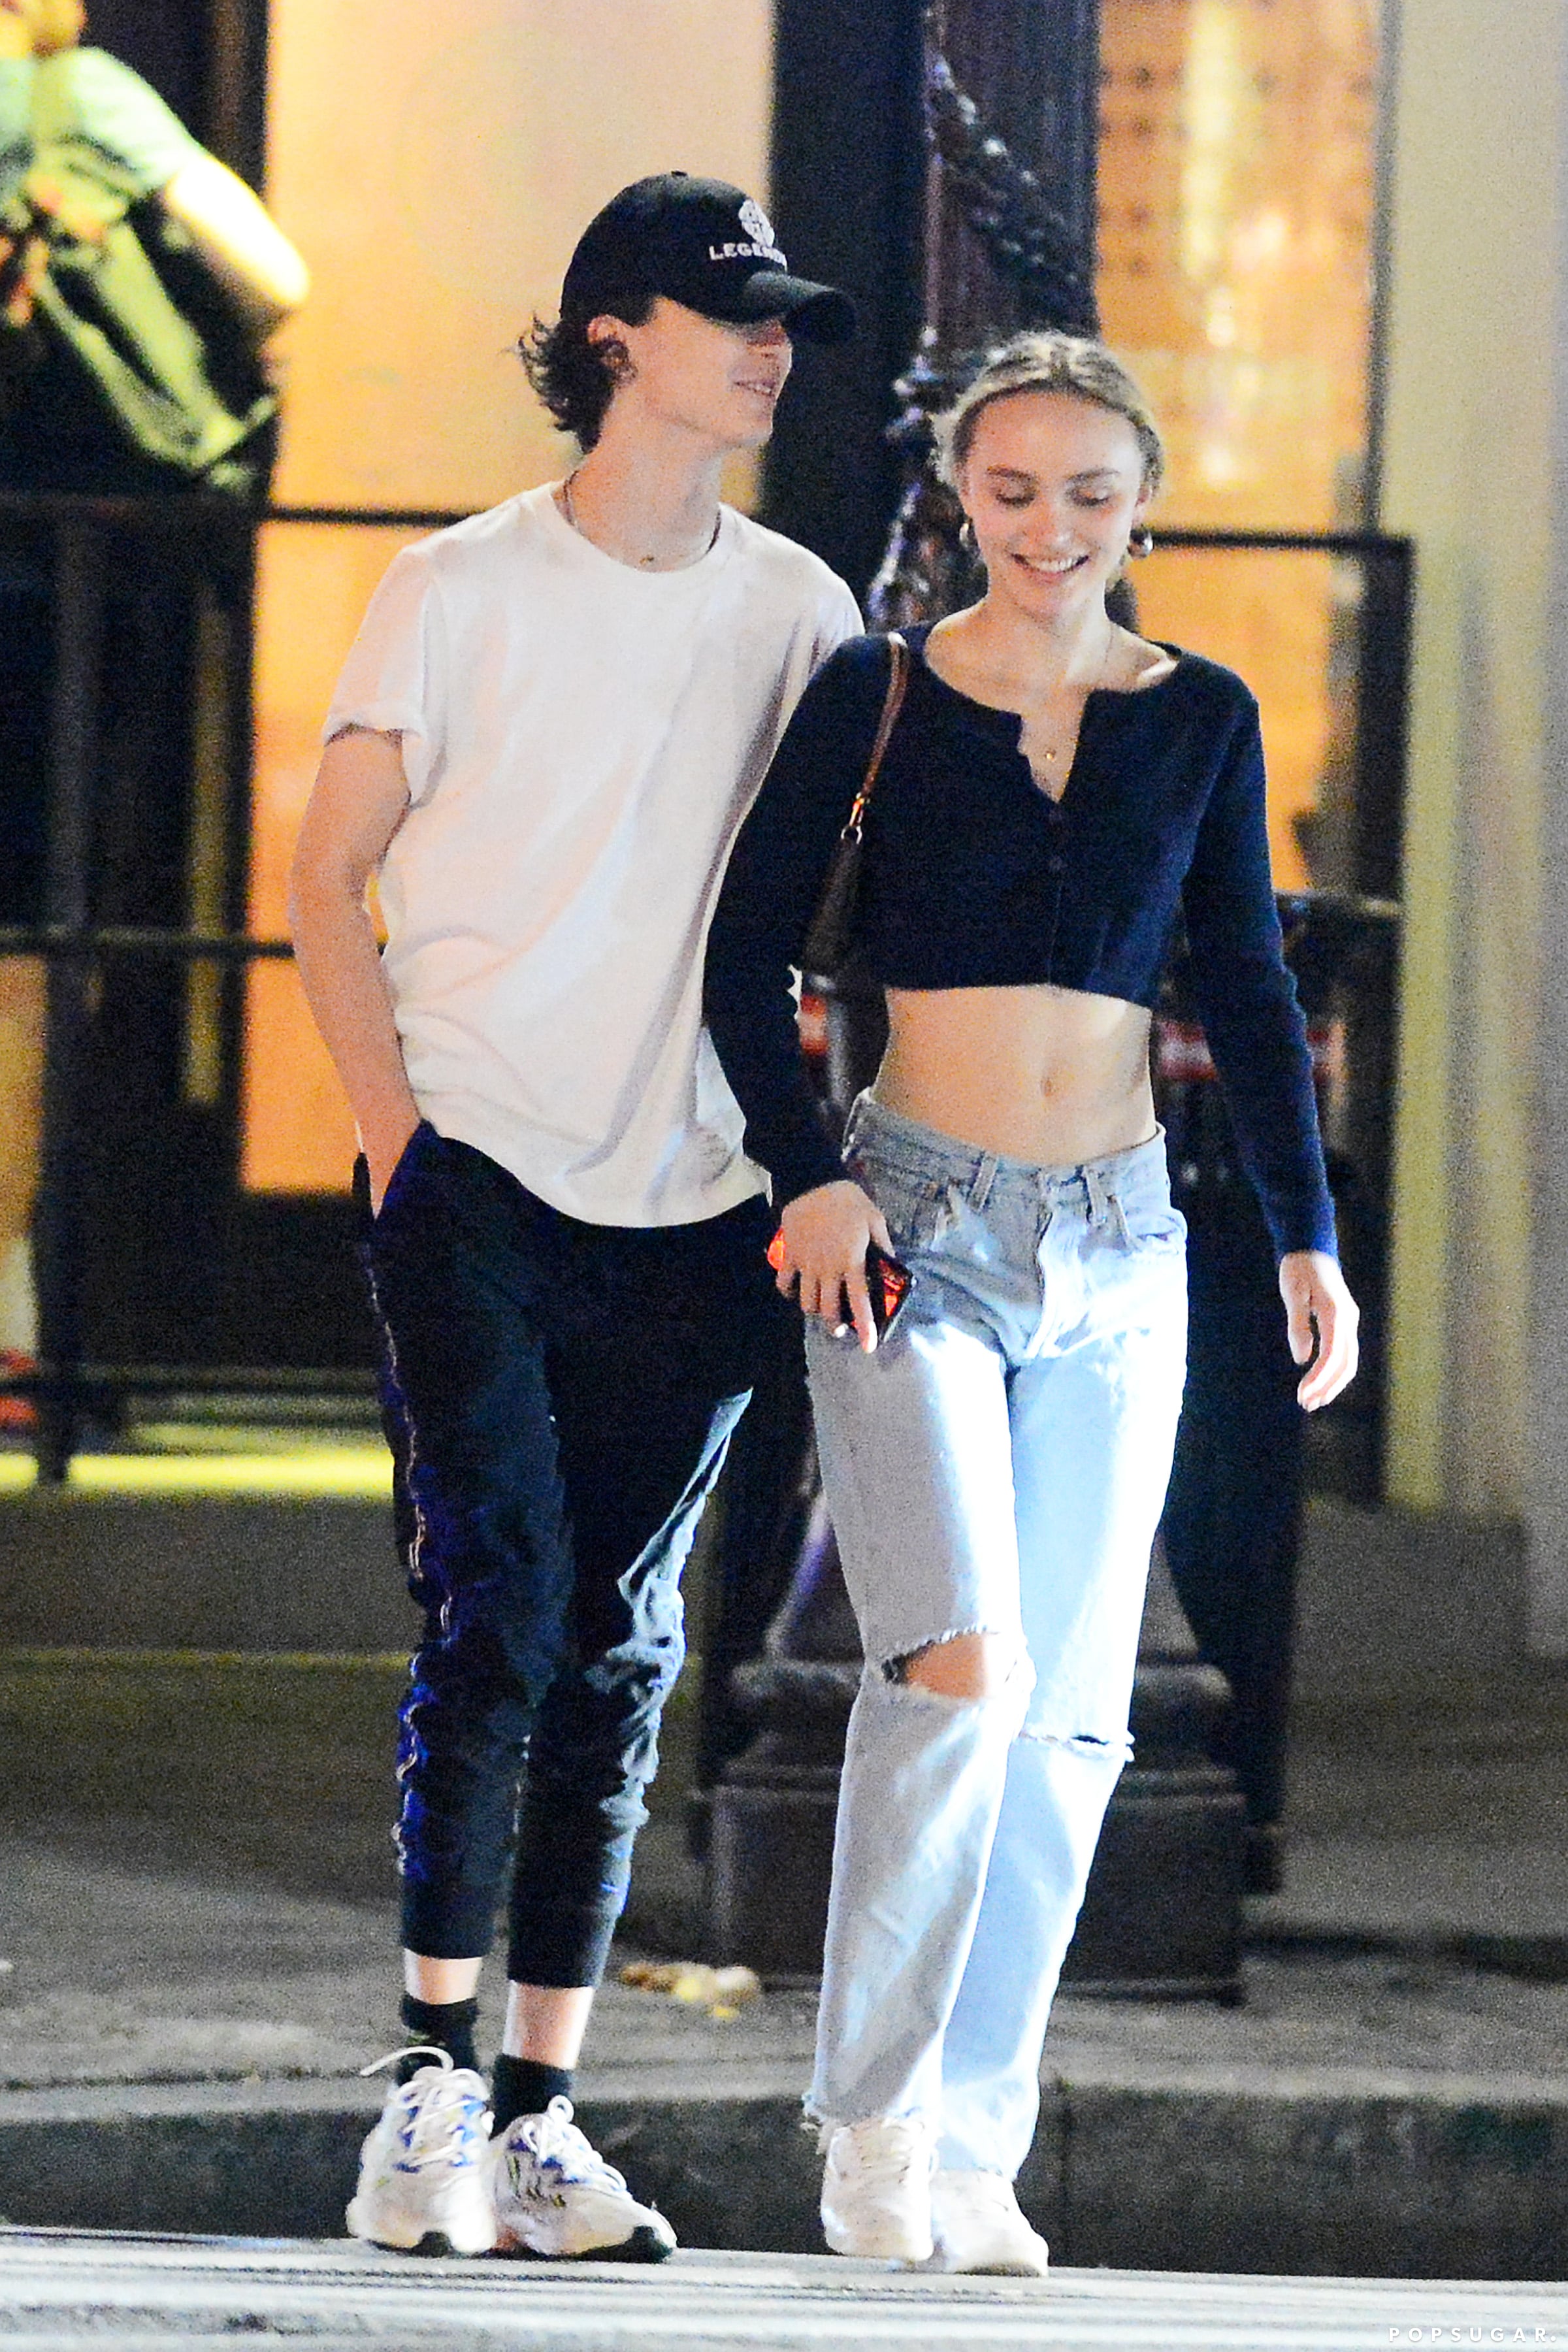 Lily-Rose Depp Hangs Out with Boyfriend Timothee Chalamet in NYC!: Photo  1205474, Lily Rose Depp, Timothee Chalamet Pictures